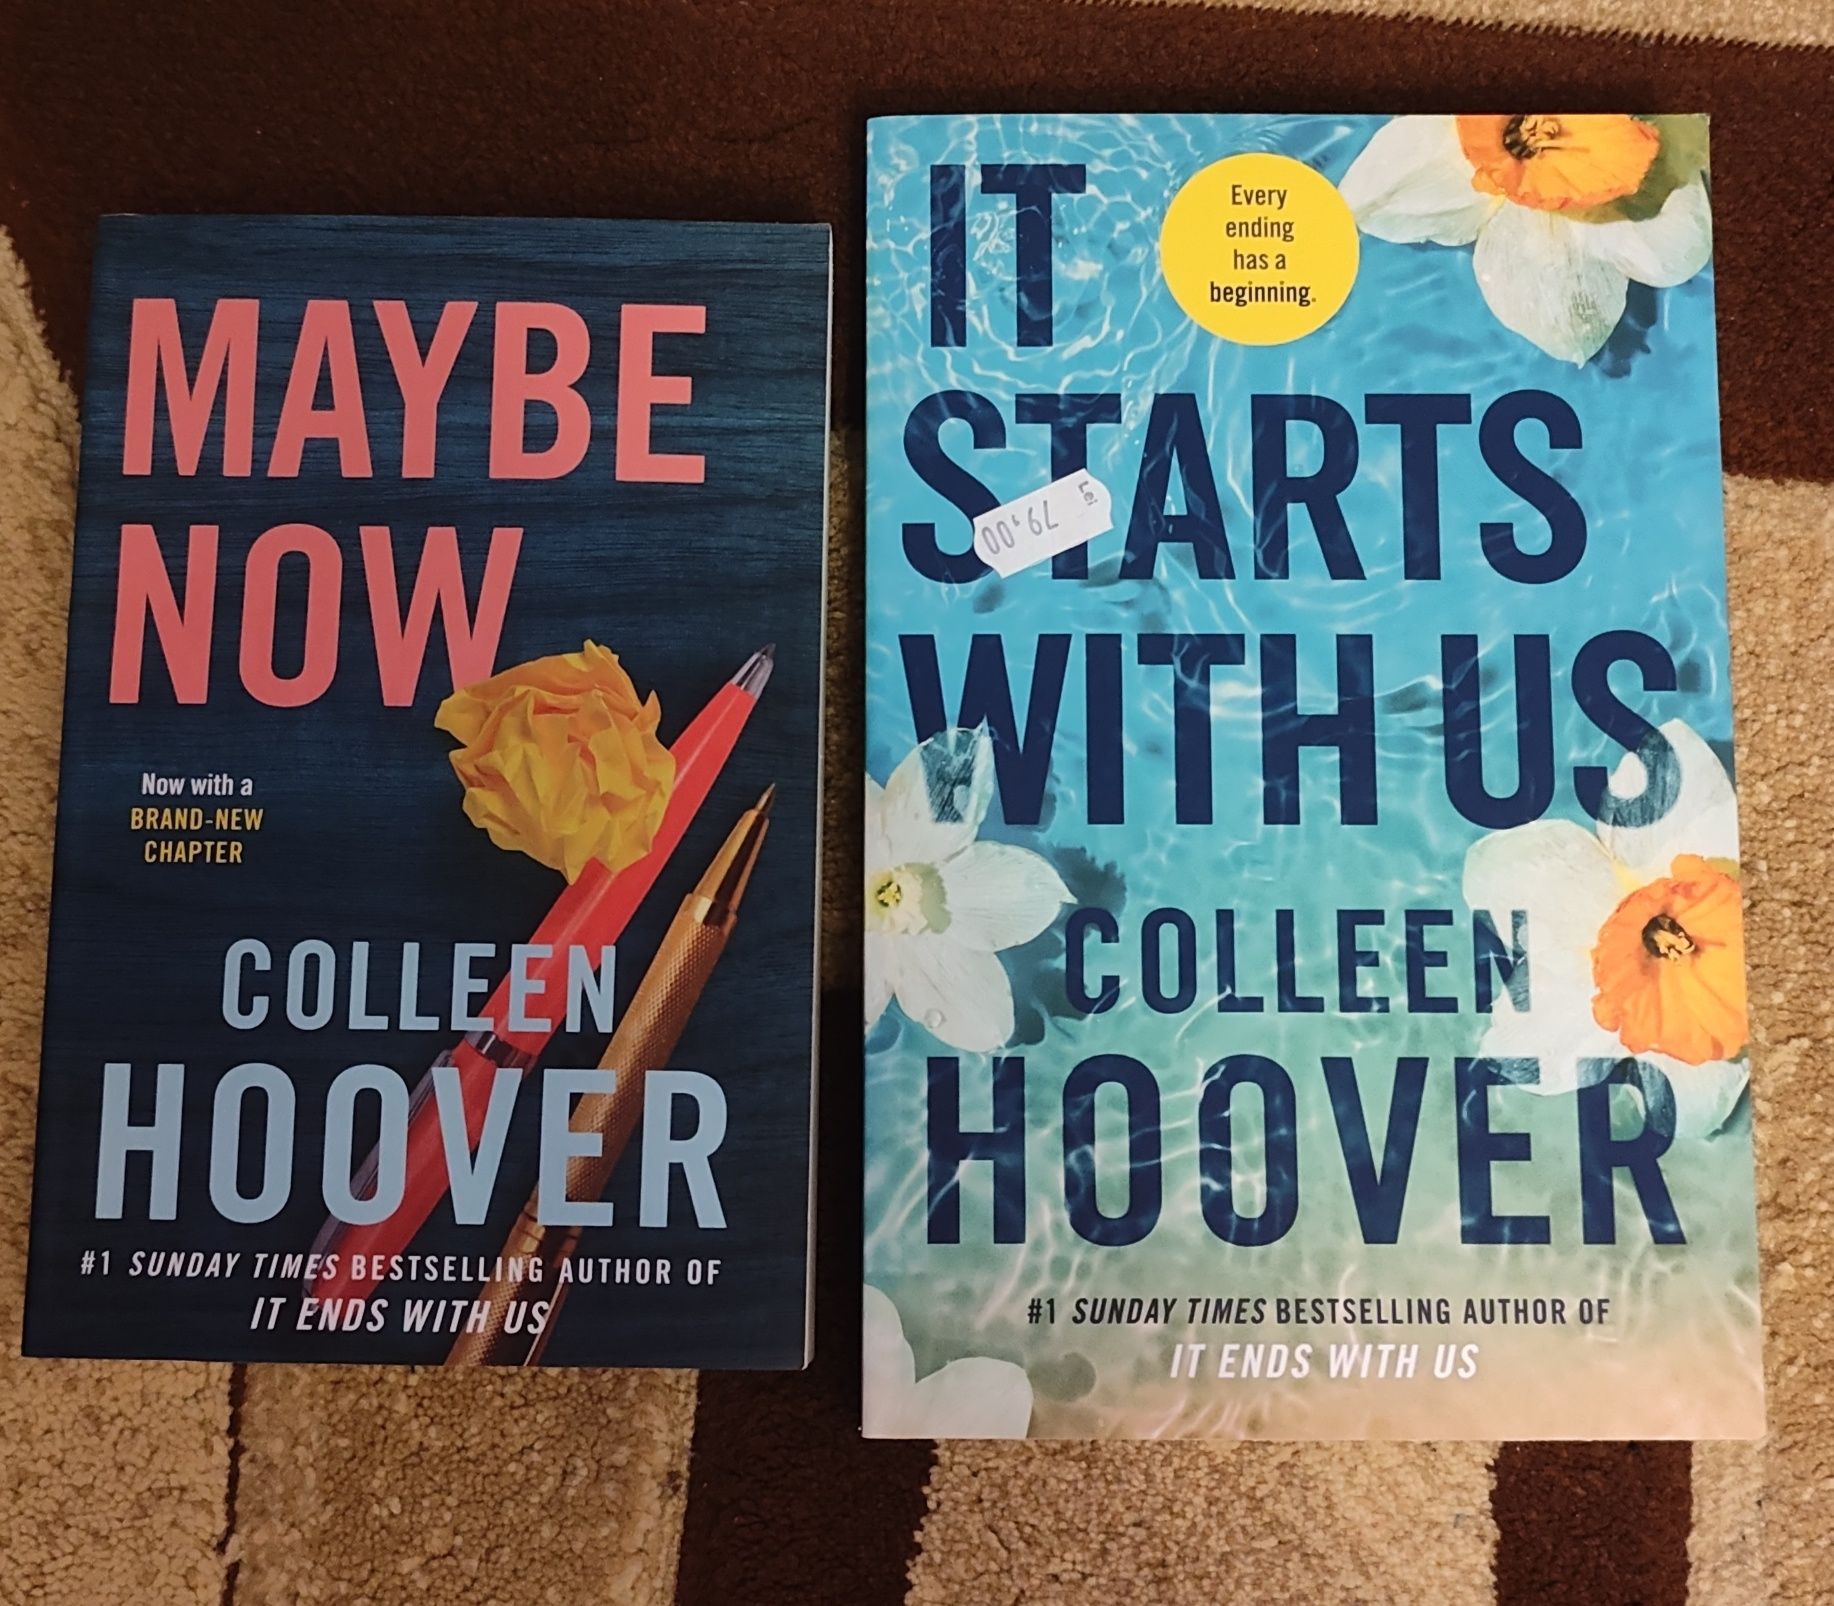 Colleen hoover. It's starts with us + Maybe now